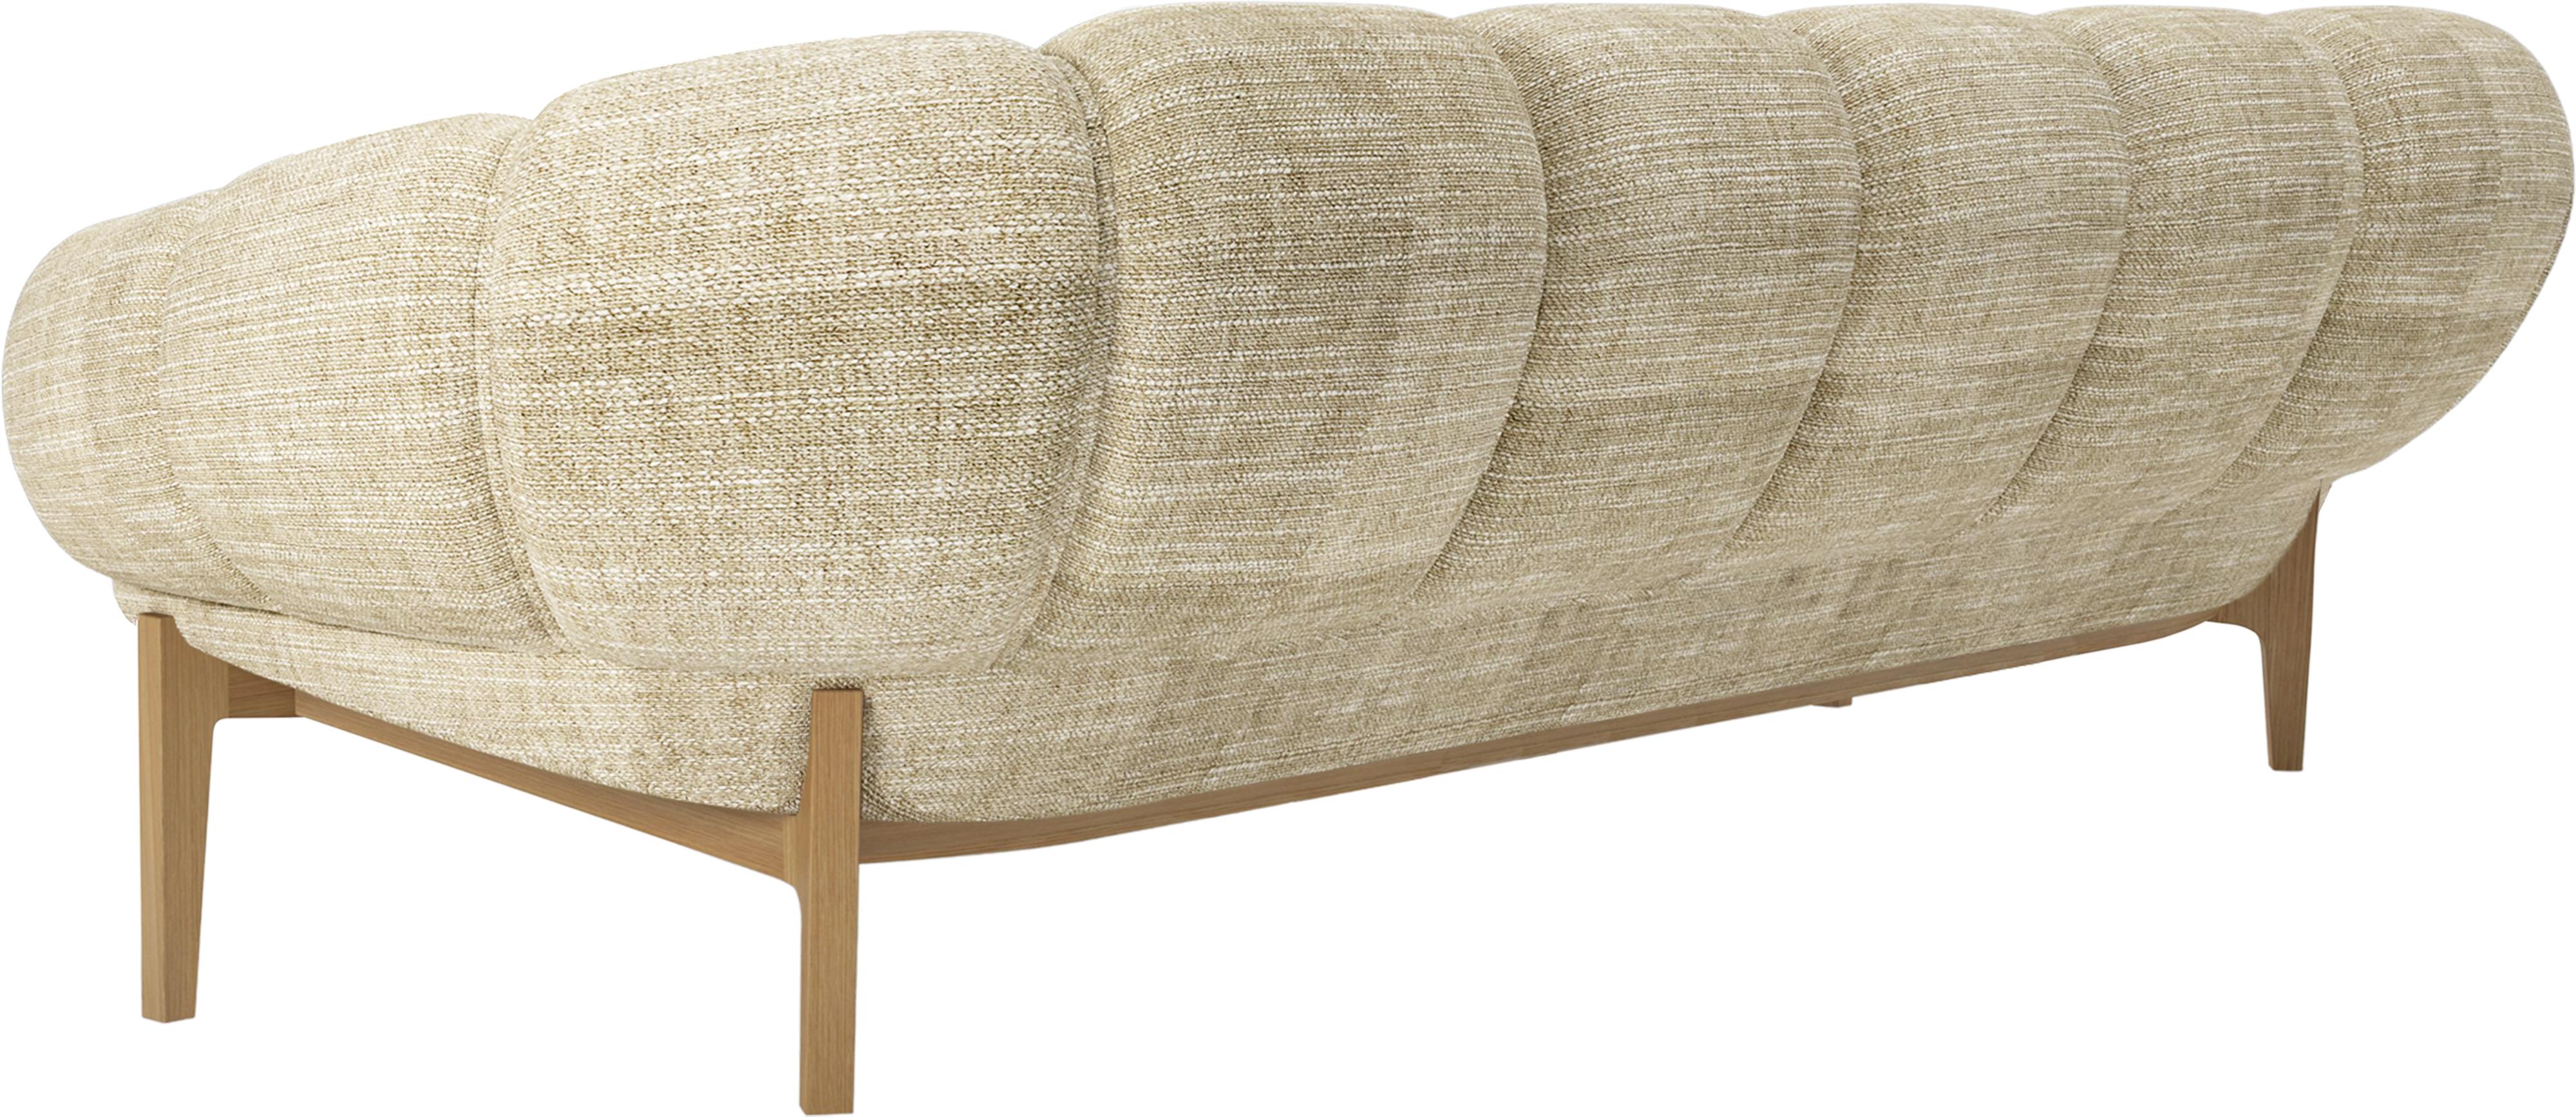 Fabric 'Croissant' Sofa by Illum Wikkelsø for GUBI with Walnut Legs For Sale 3